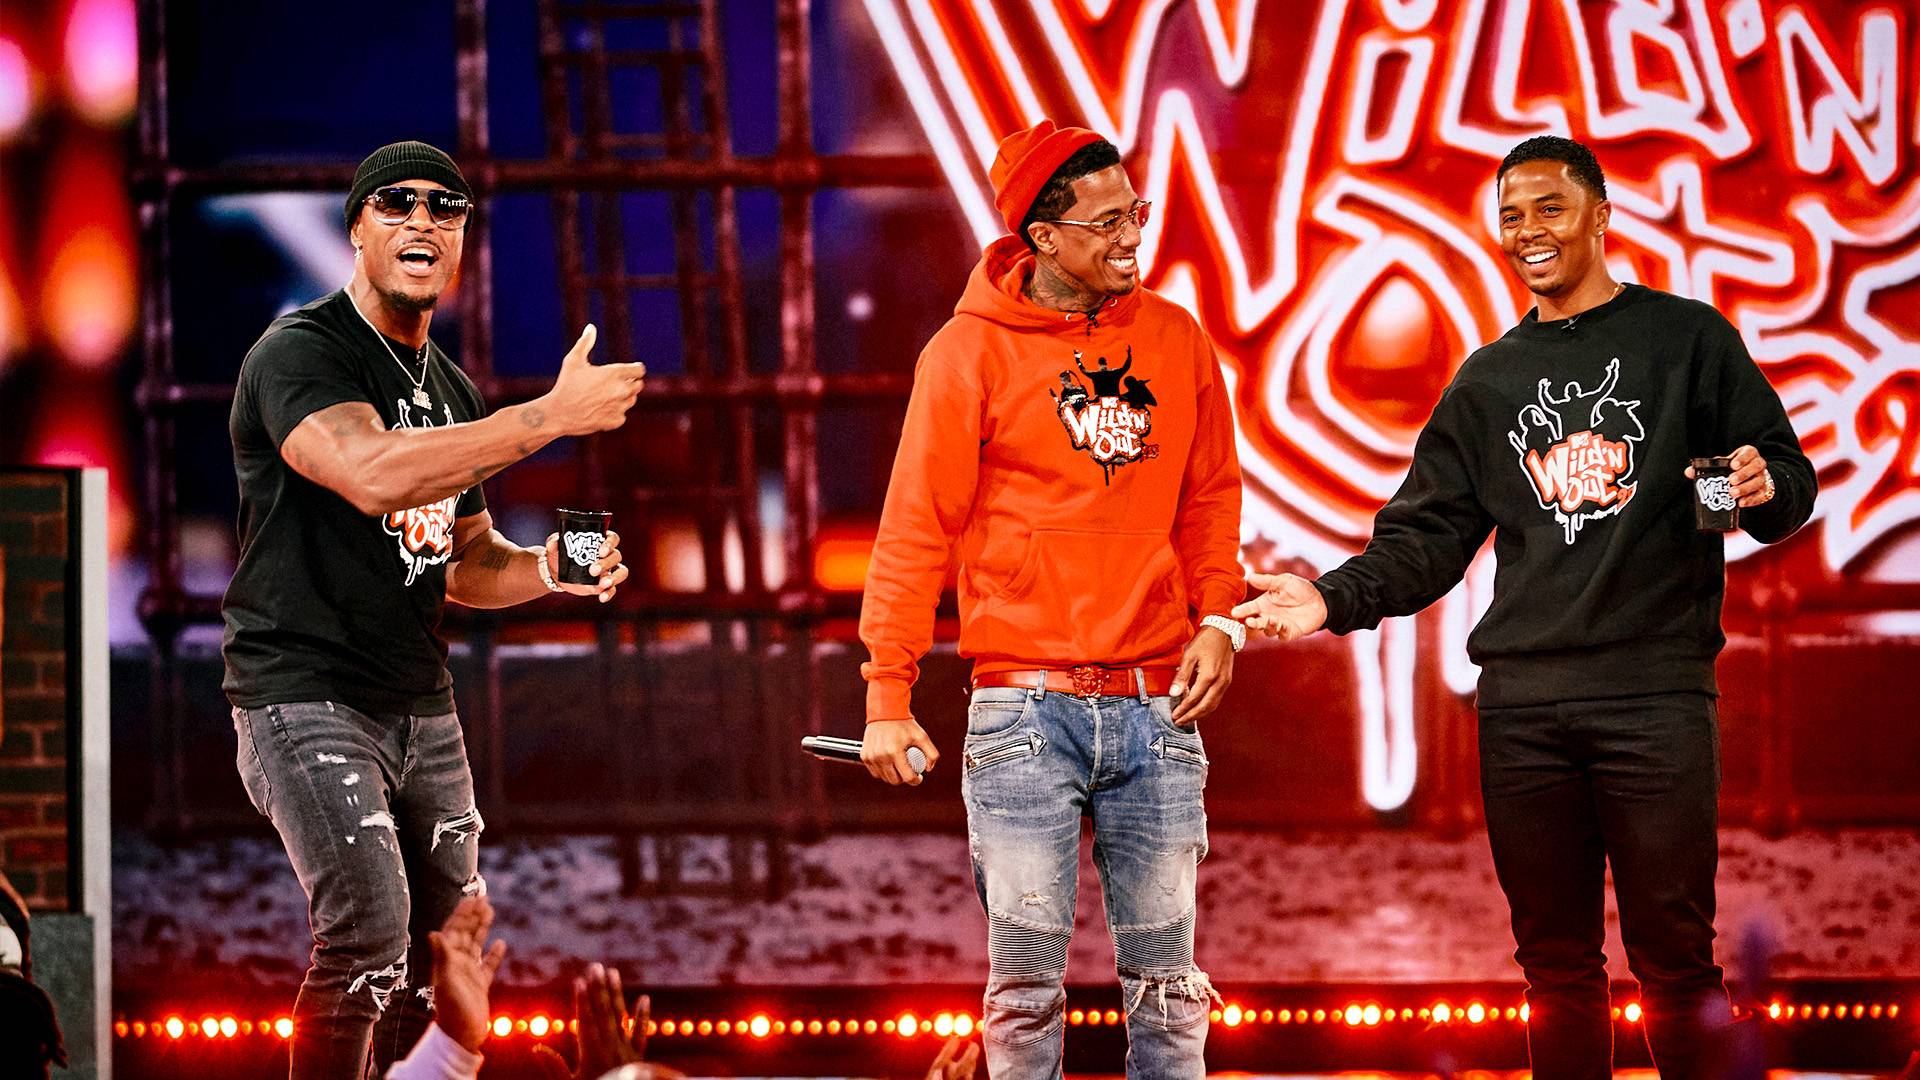 Wild 'N Out on X: How much you putting in your cup? #WildNOut   / X